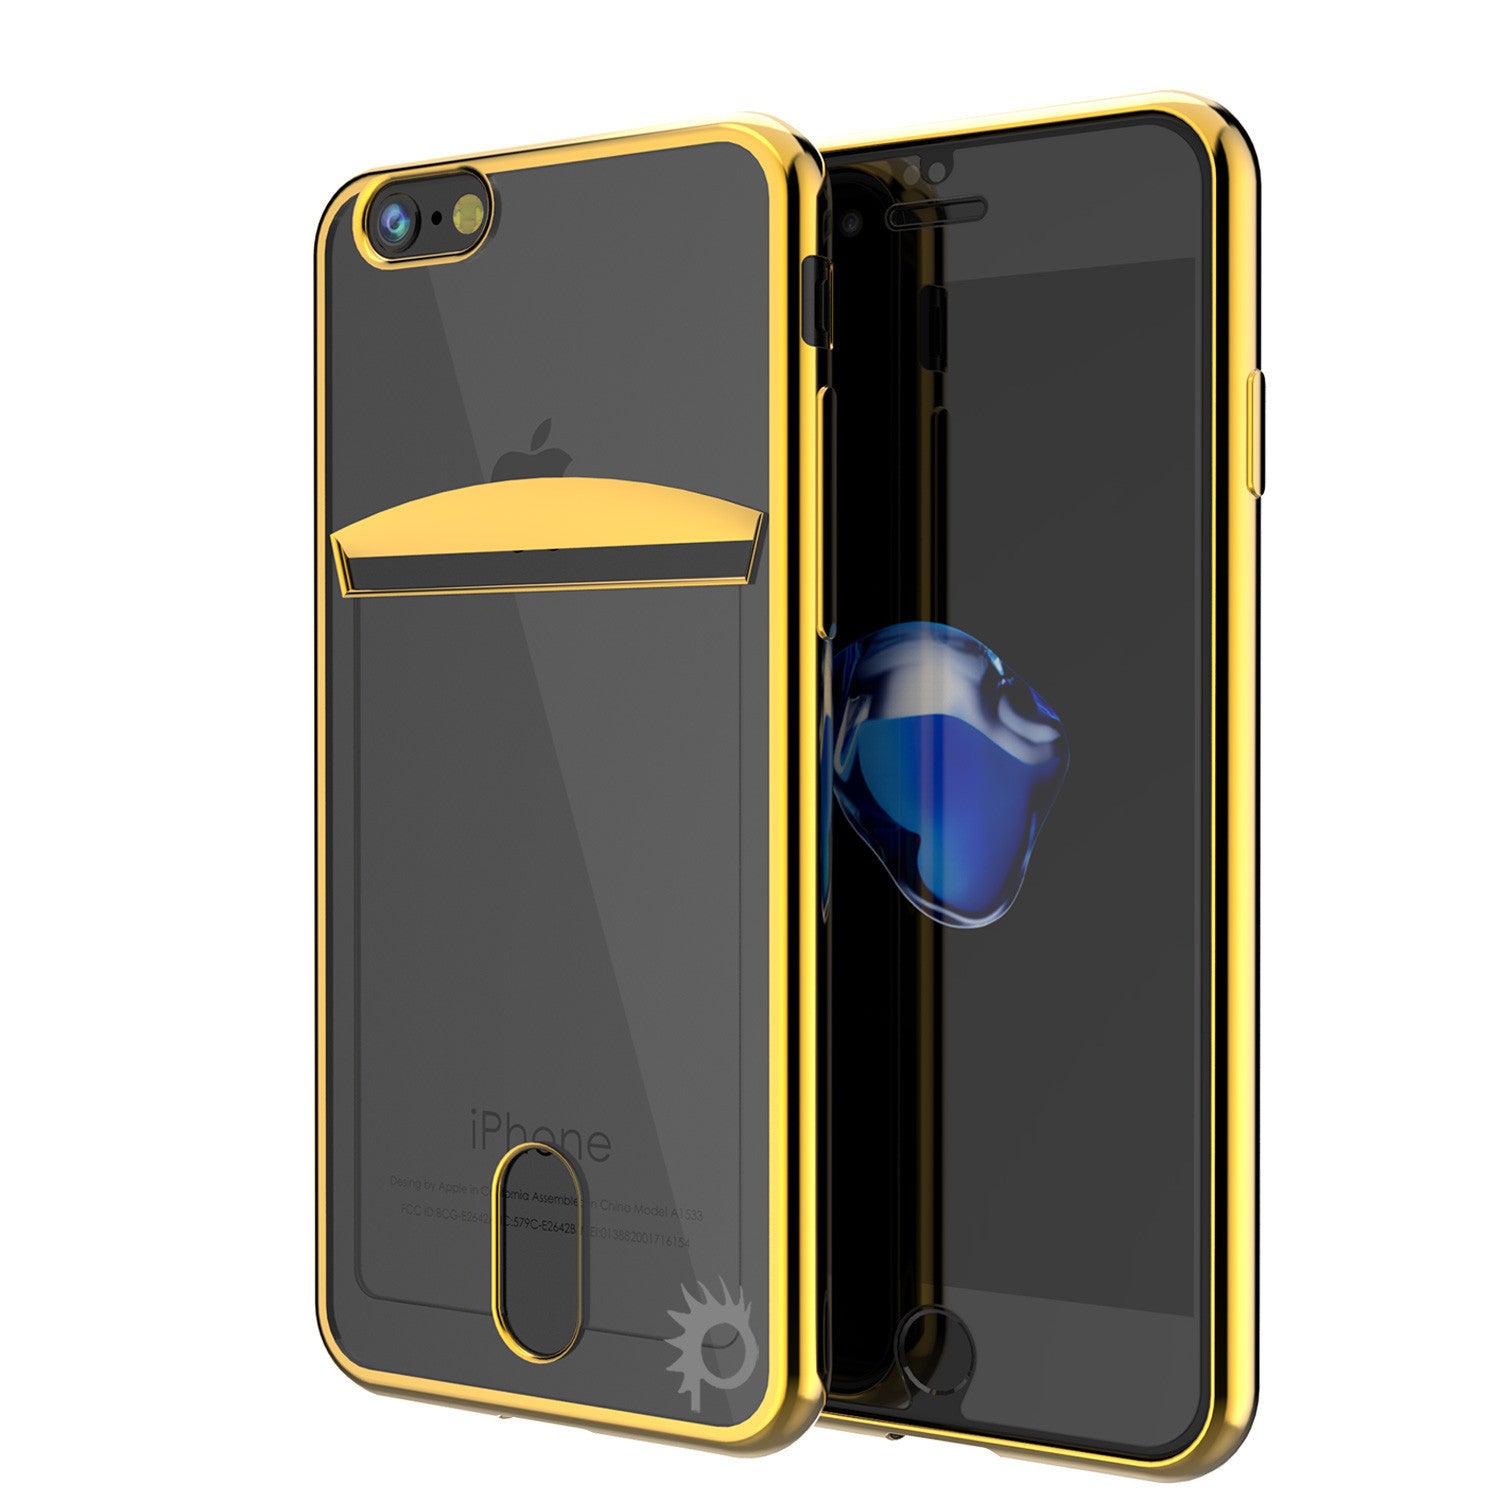 iPhone 7+ Plus Case, PUNKCASE® LUCID Gold Series | Card Slot | SHIELD Screen Protector | Ultra fit (Color in image: Gold)